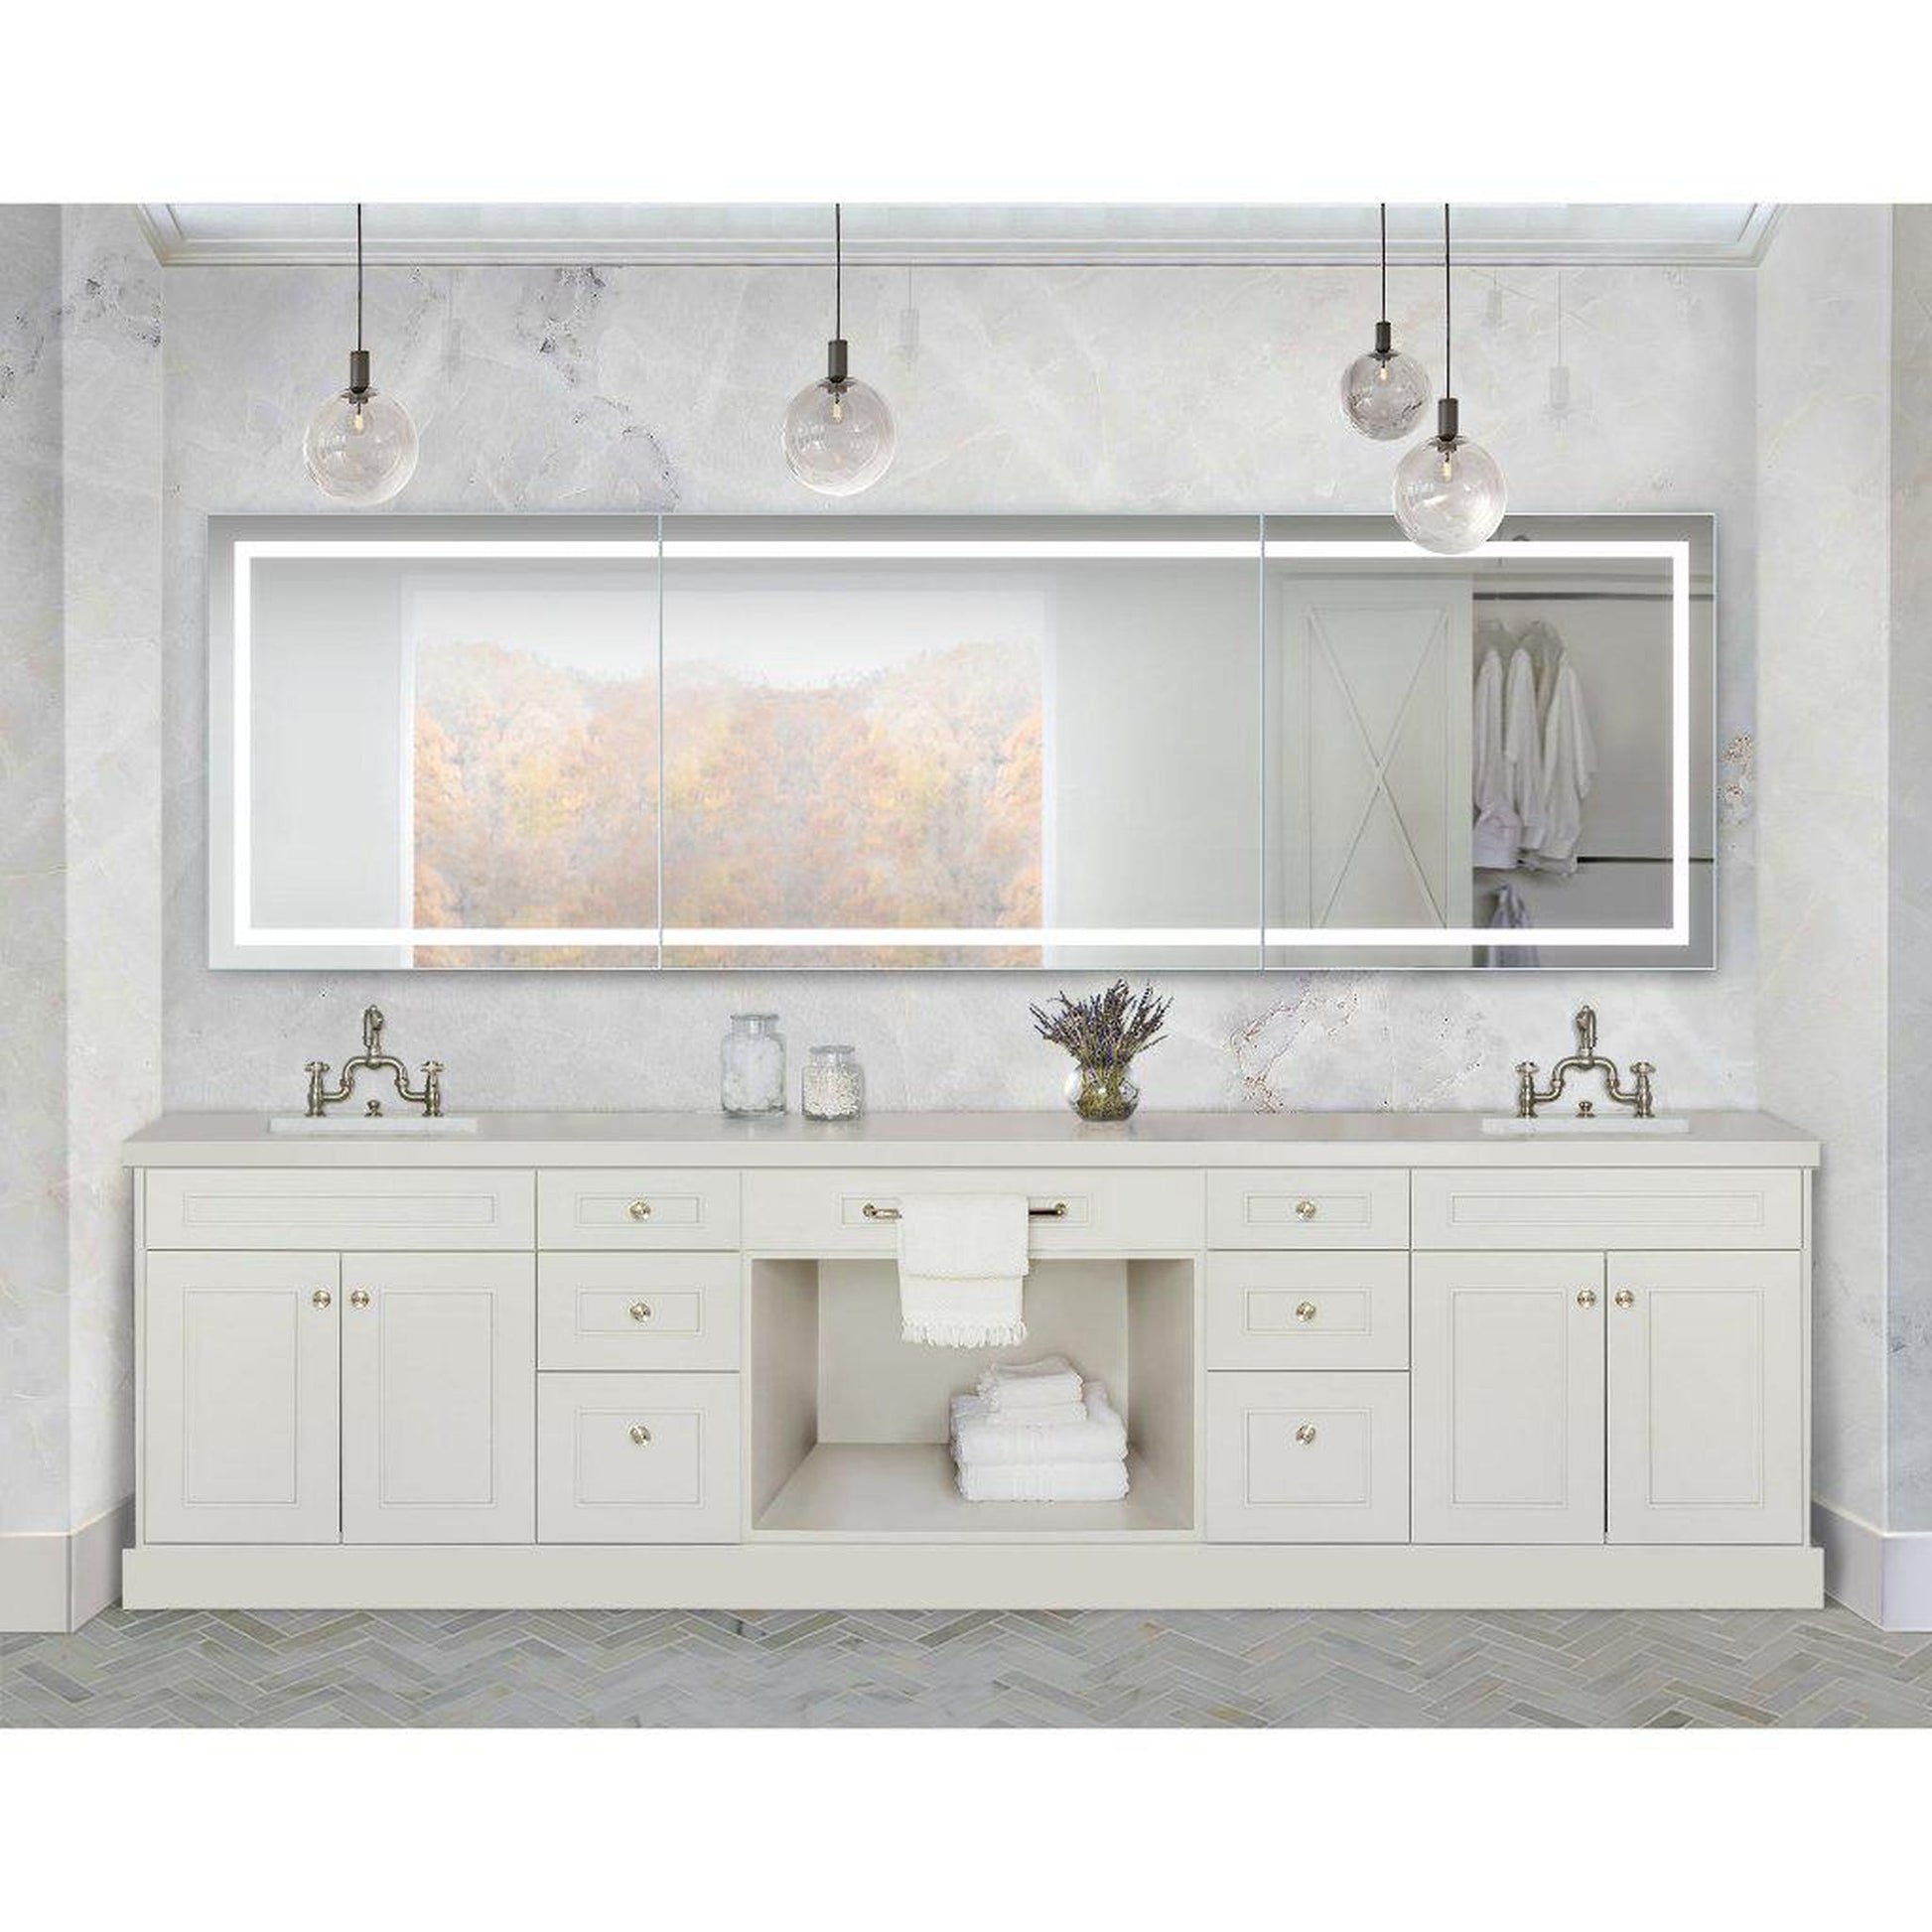 Krugg Reflections Mod 120" x 36" 5000K Long Modular Corner Wall-Mounted Silver-Backed LED Bathroom Vanity Mirror With Built-in Defogger and Dimmer